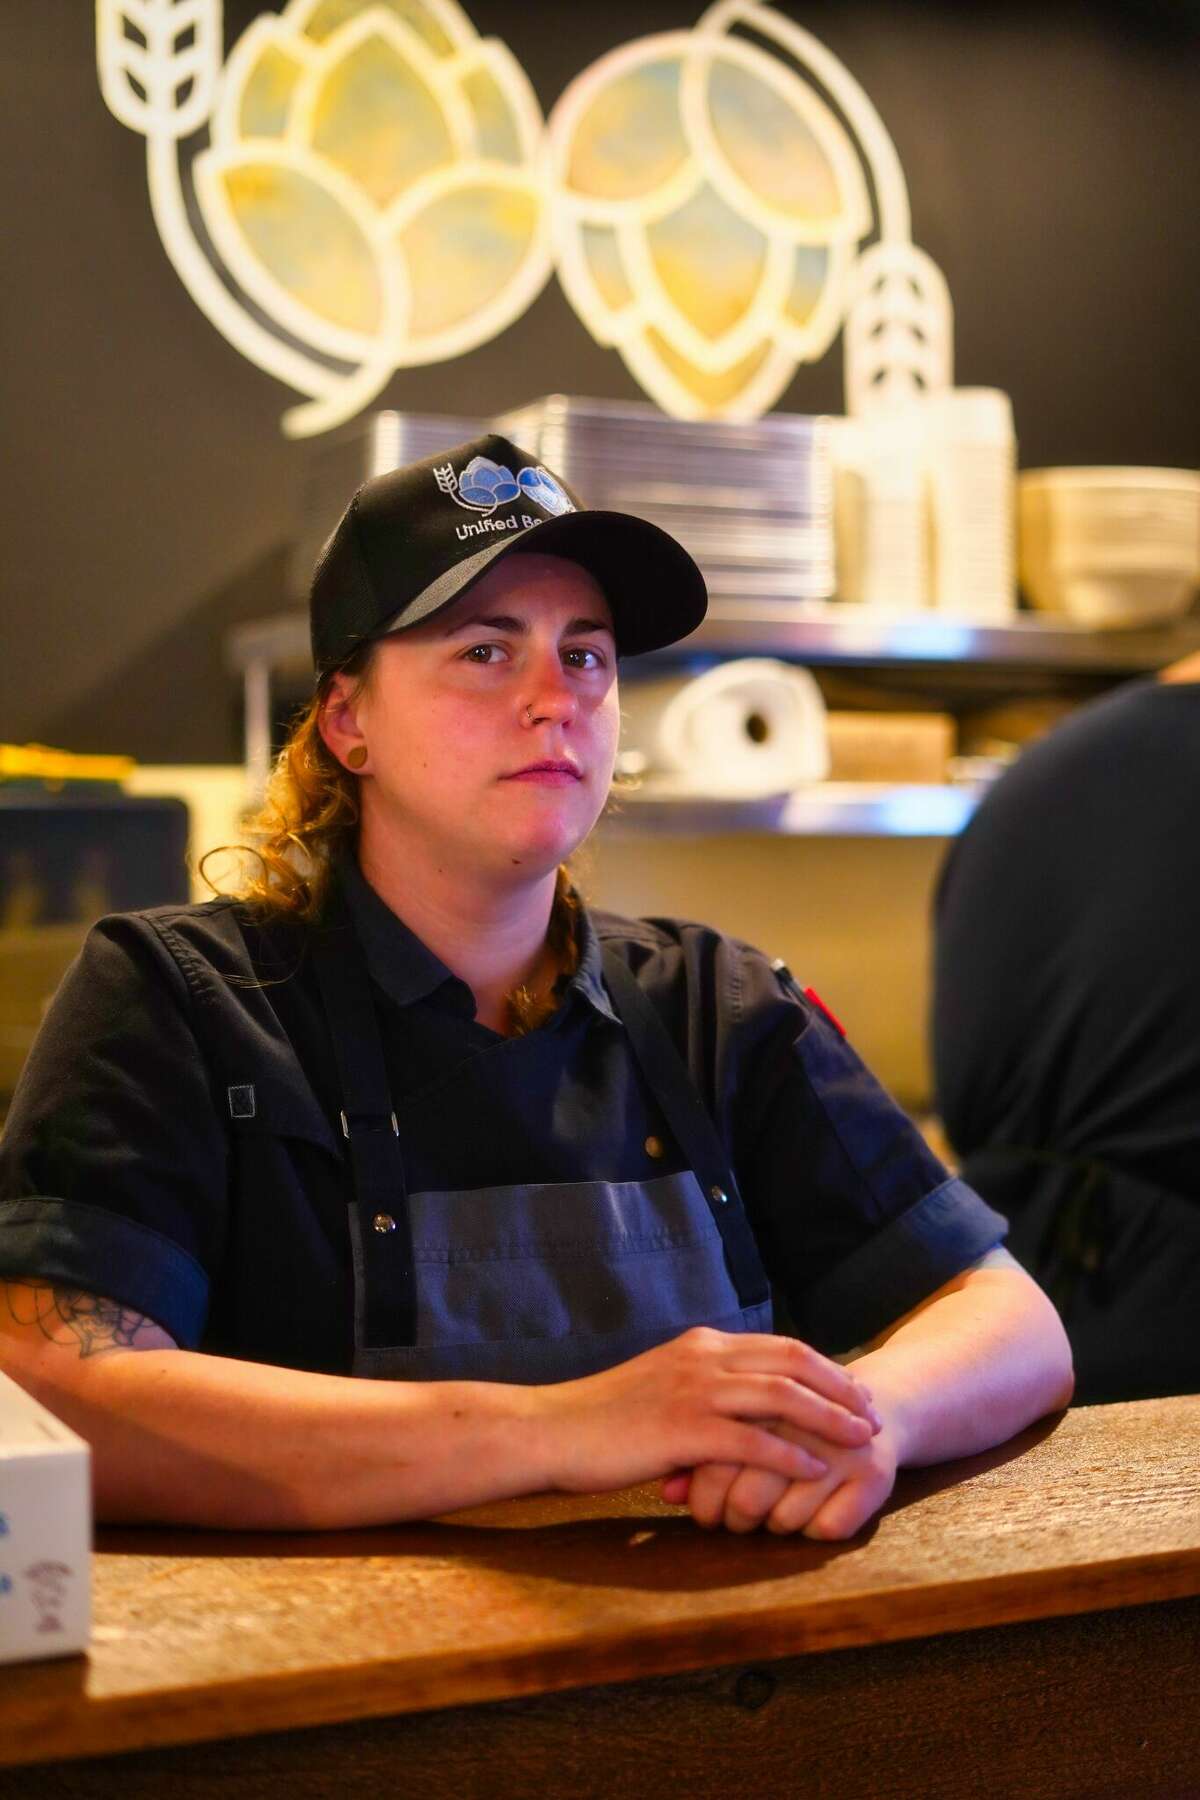 Michele Hunter, former head chef of Hamlet & Ghost in Saratoga Springs, since May has been serving Central and South American fare at Unified Beerworks in Malta.